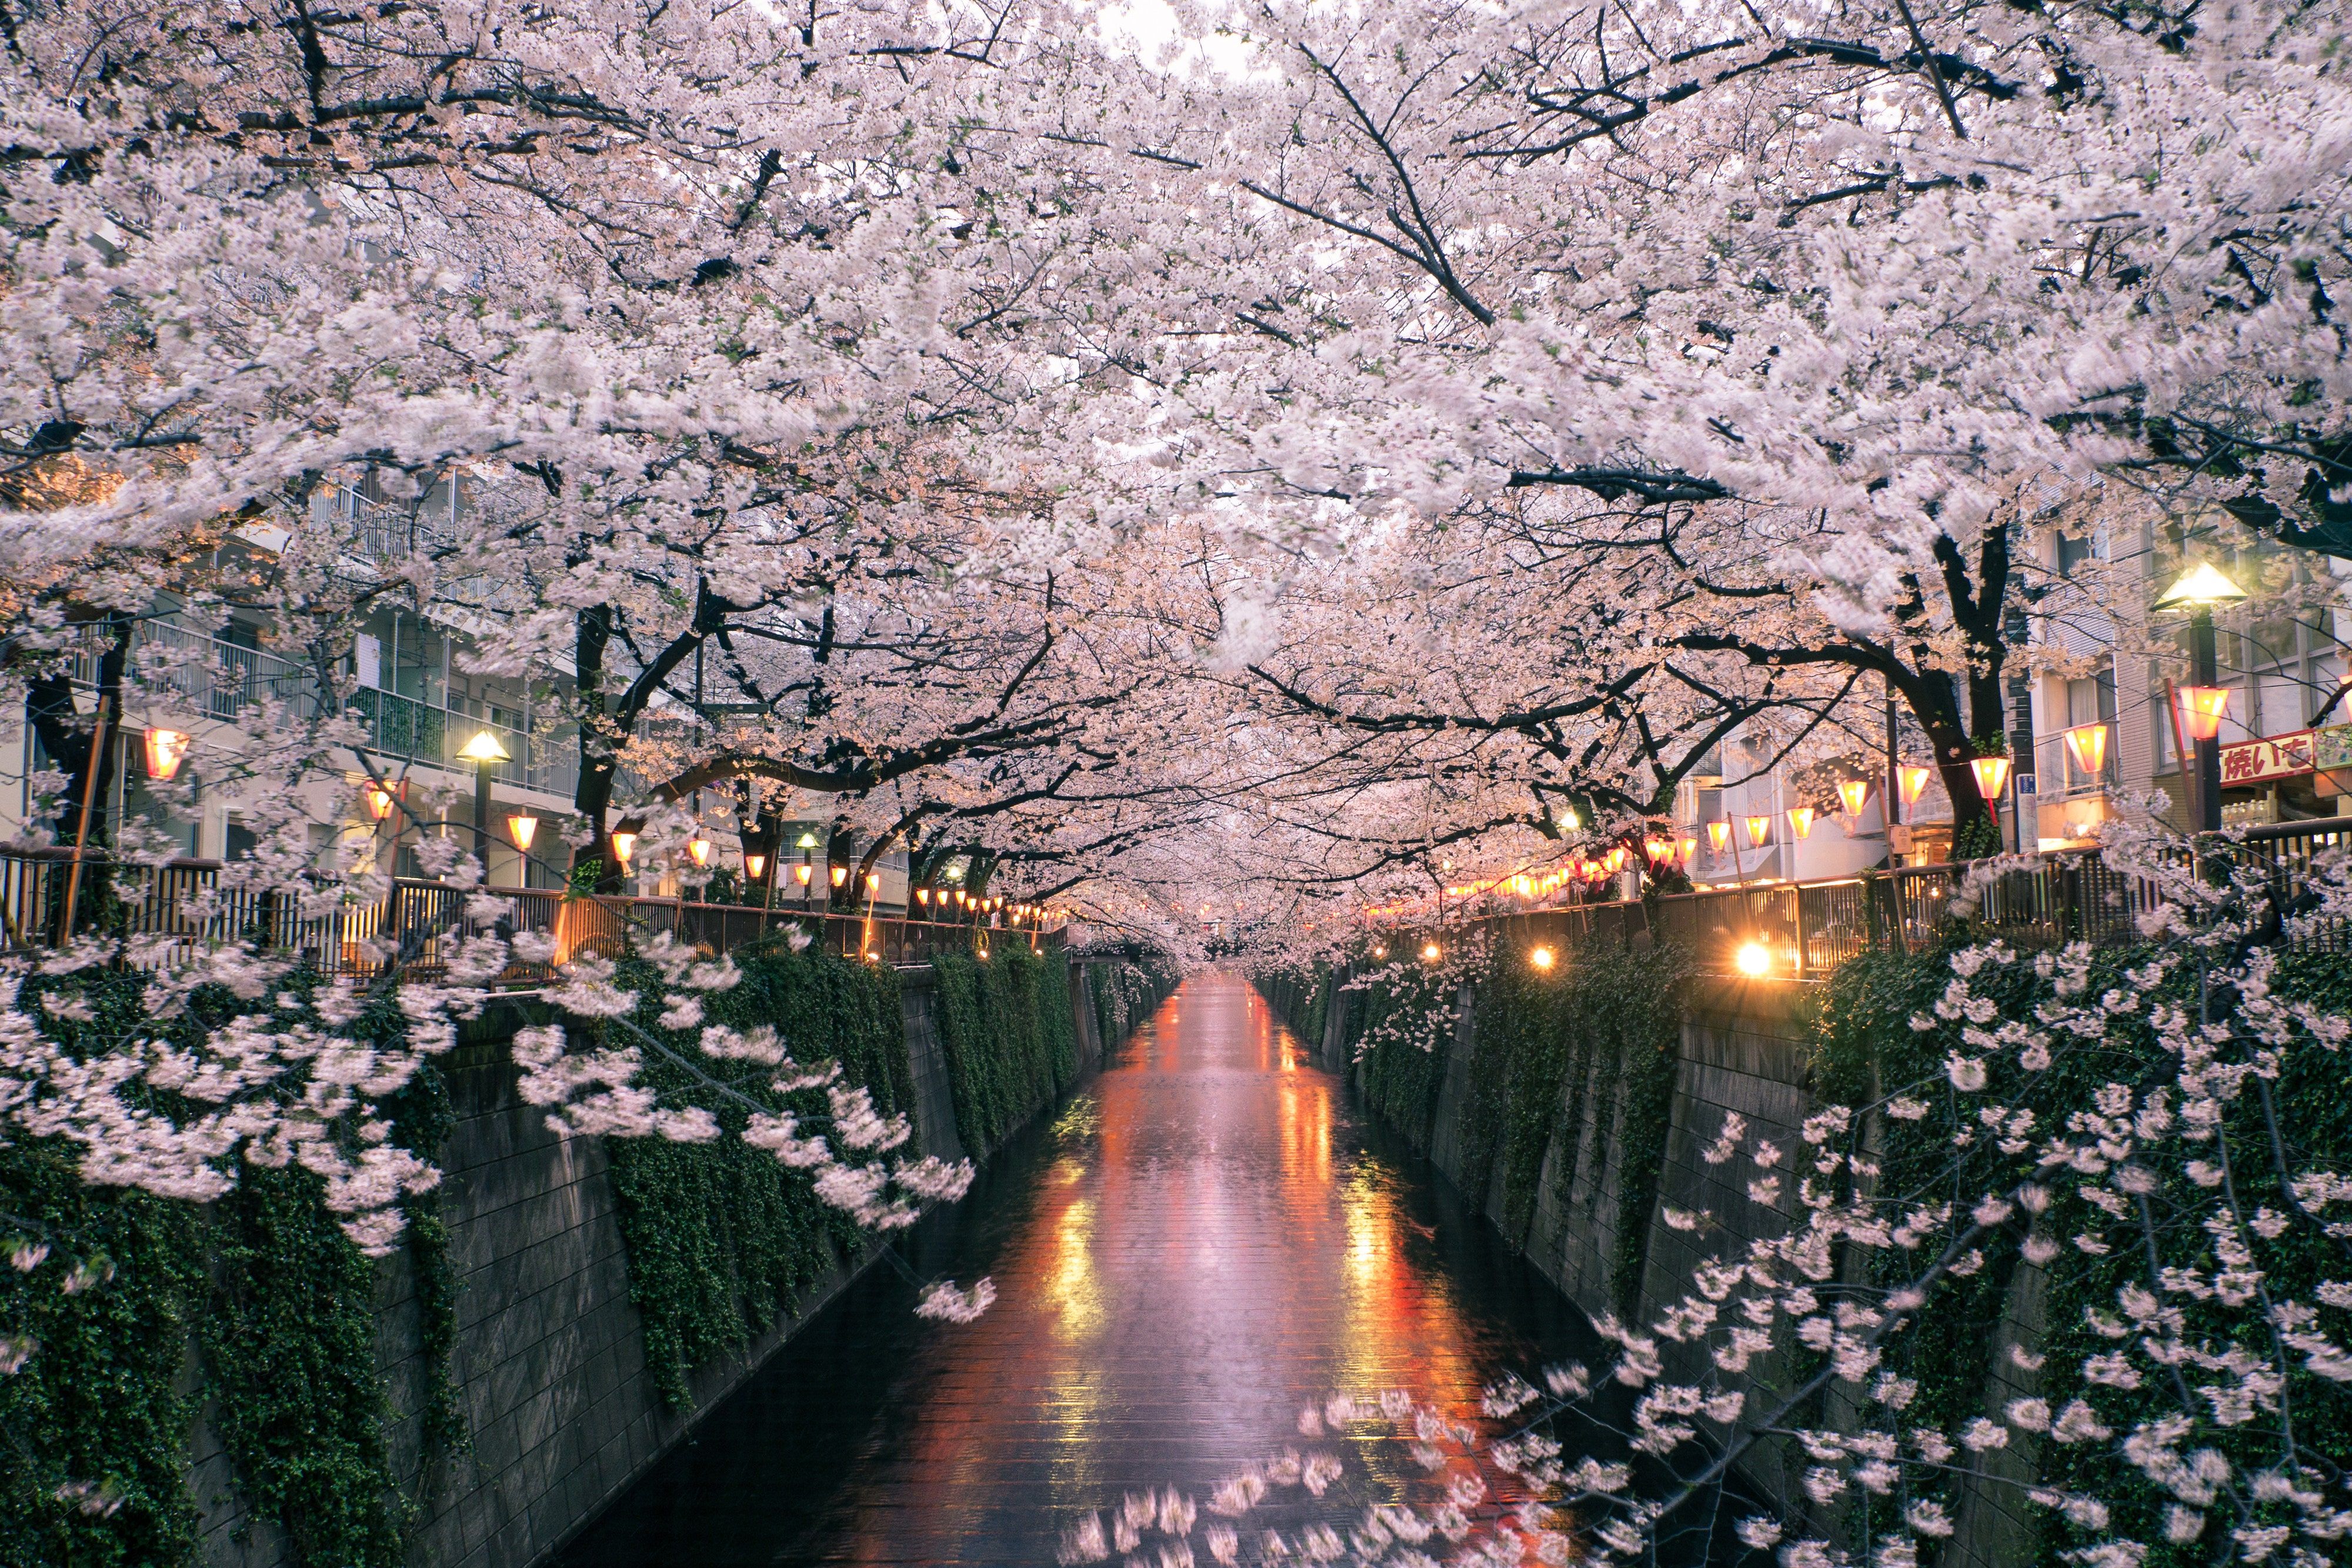 How to See Japan's Cherry Blossoms. Condé Nast Traveler